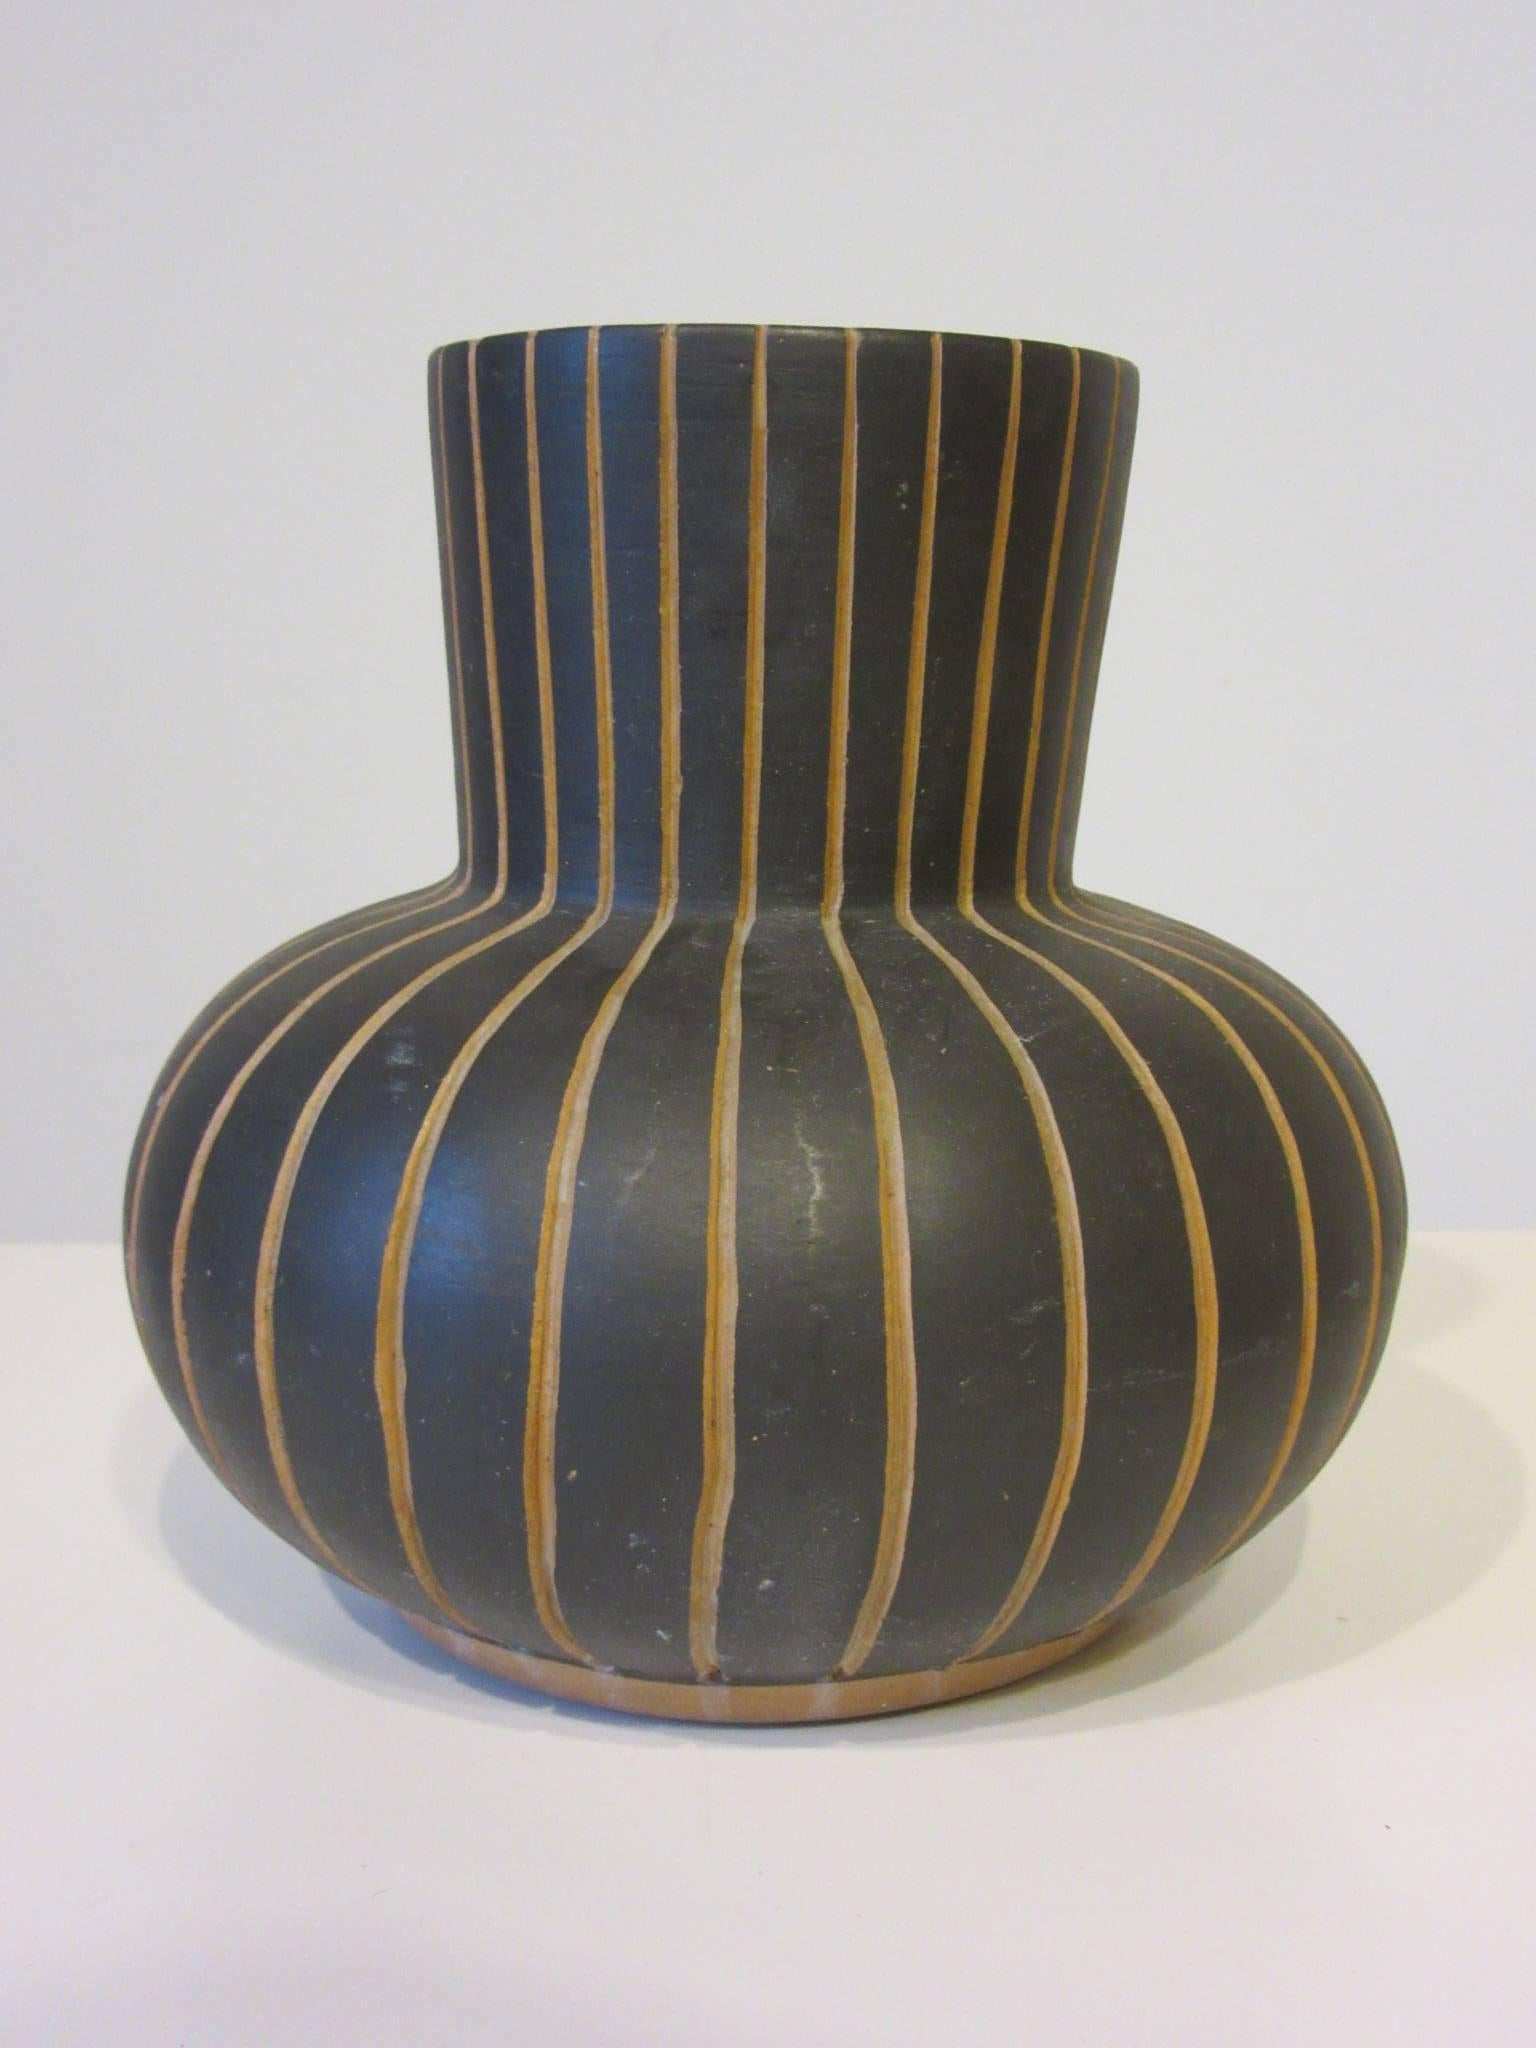 A simple and modernist styled incised art pottery vase with ebony tone body and clay under lines, inside has a warm green jade colored glaze, marked to the bottom Mexico/Contex - 7 G.